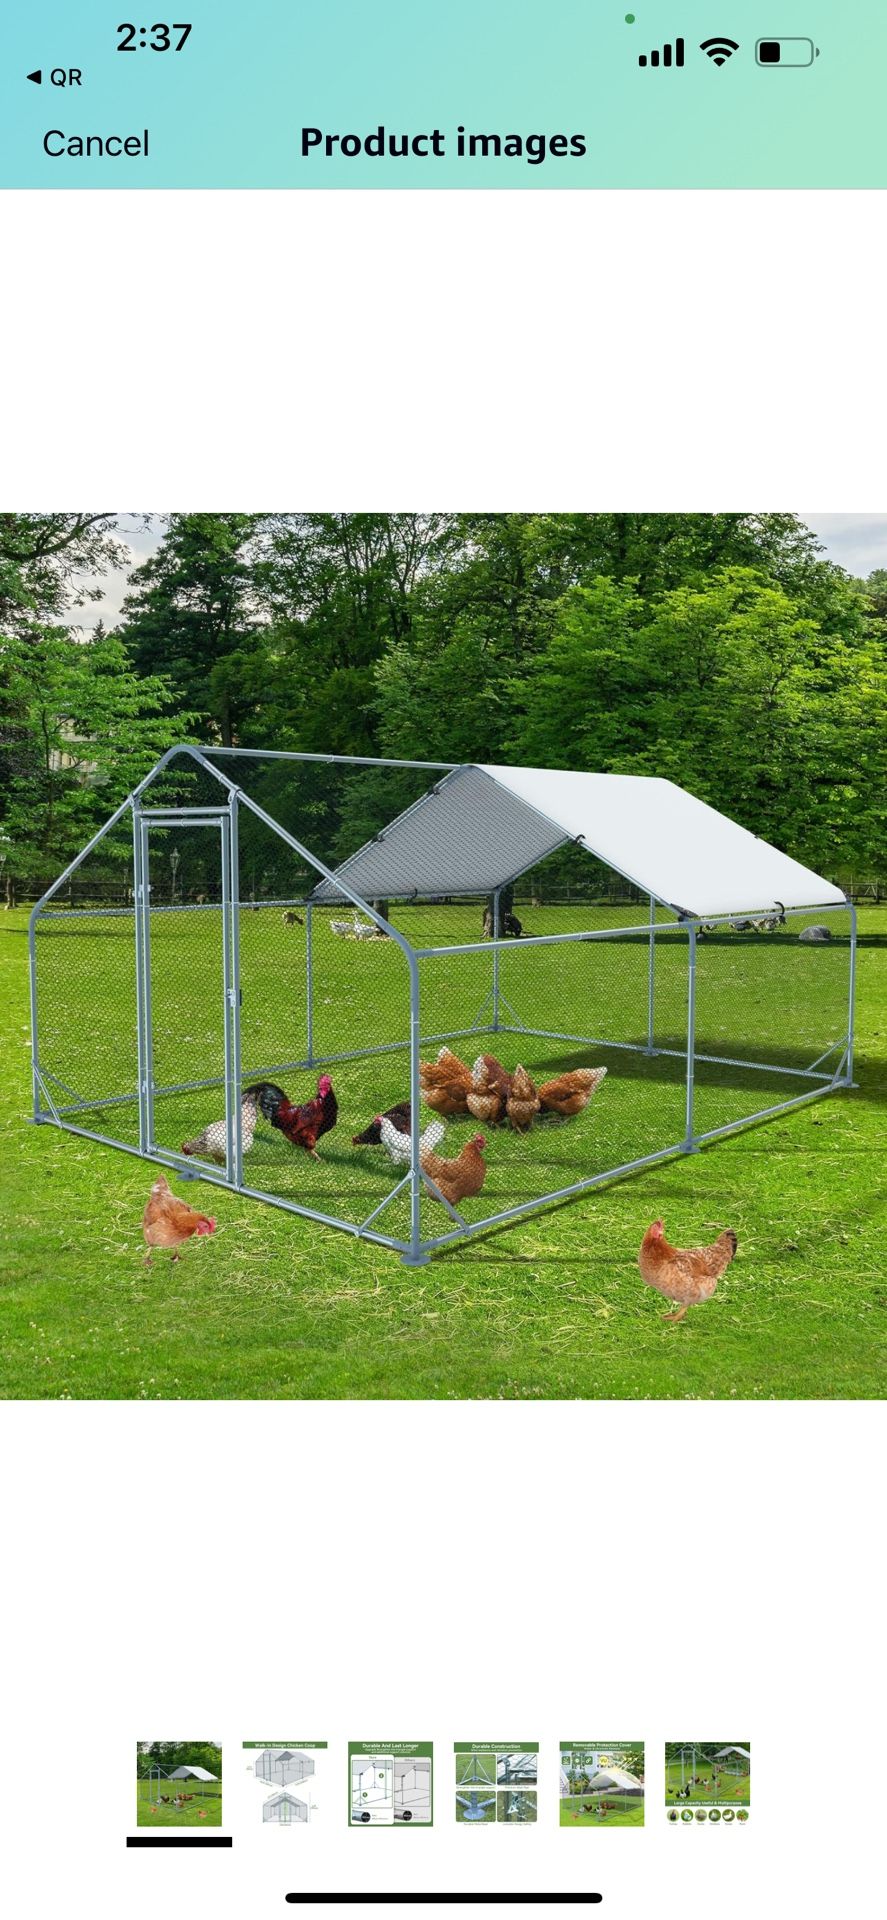 New in box Chicken Coop Extra Large Metal Chicken Run for 20 Chickens in Yard with Waterproof Cover 131.41 Square Feet Gf7315-4